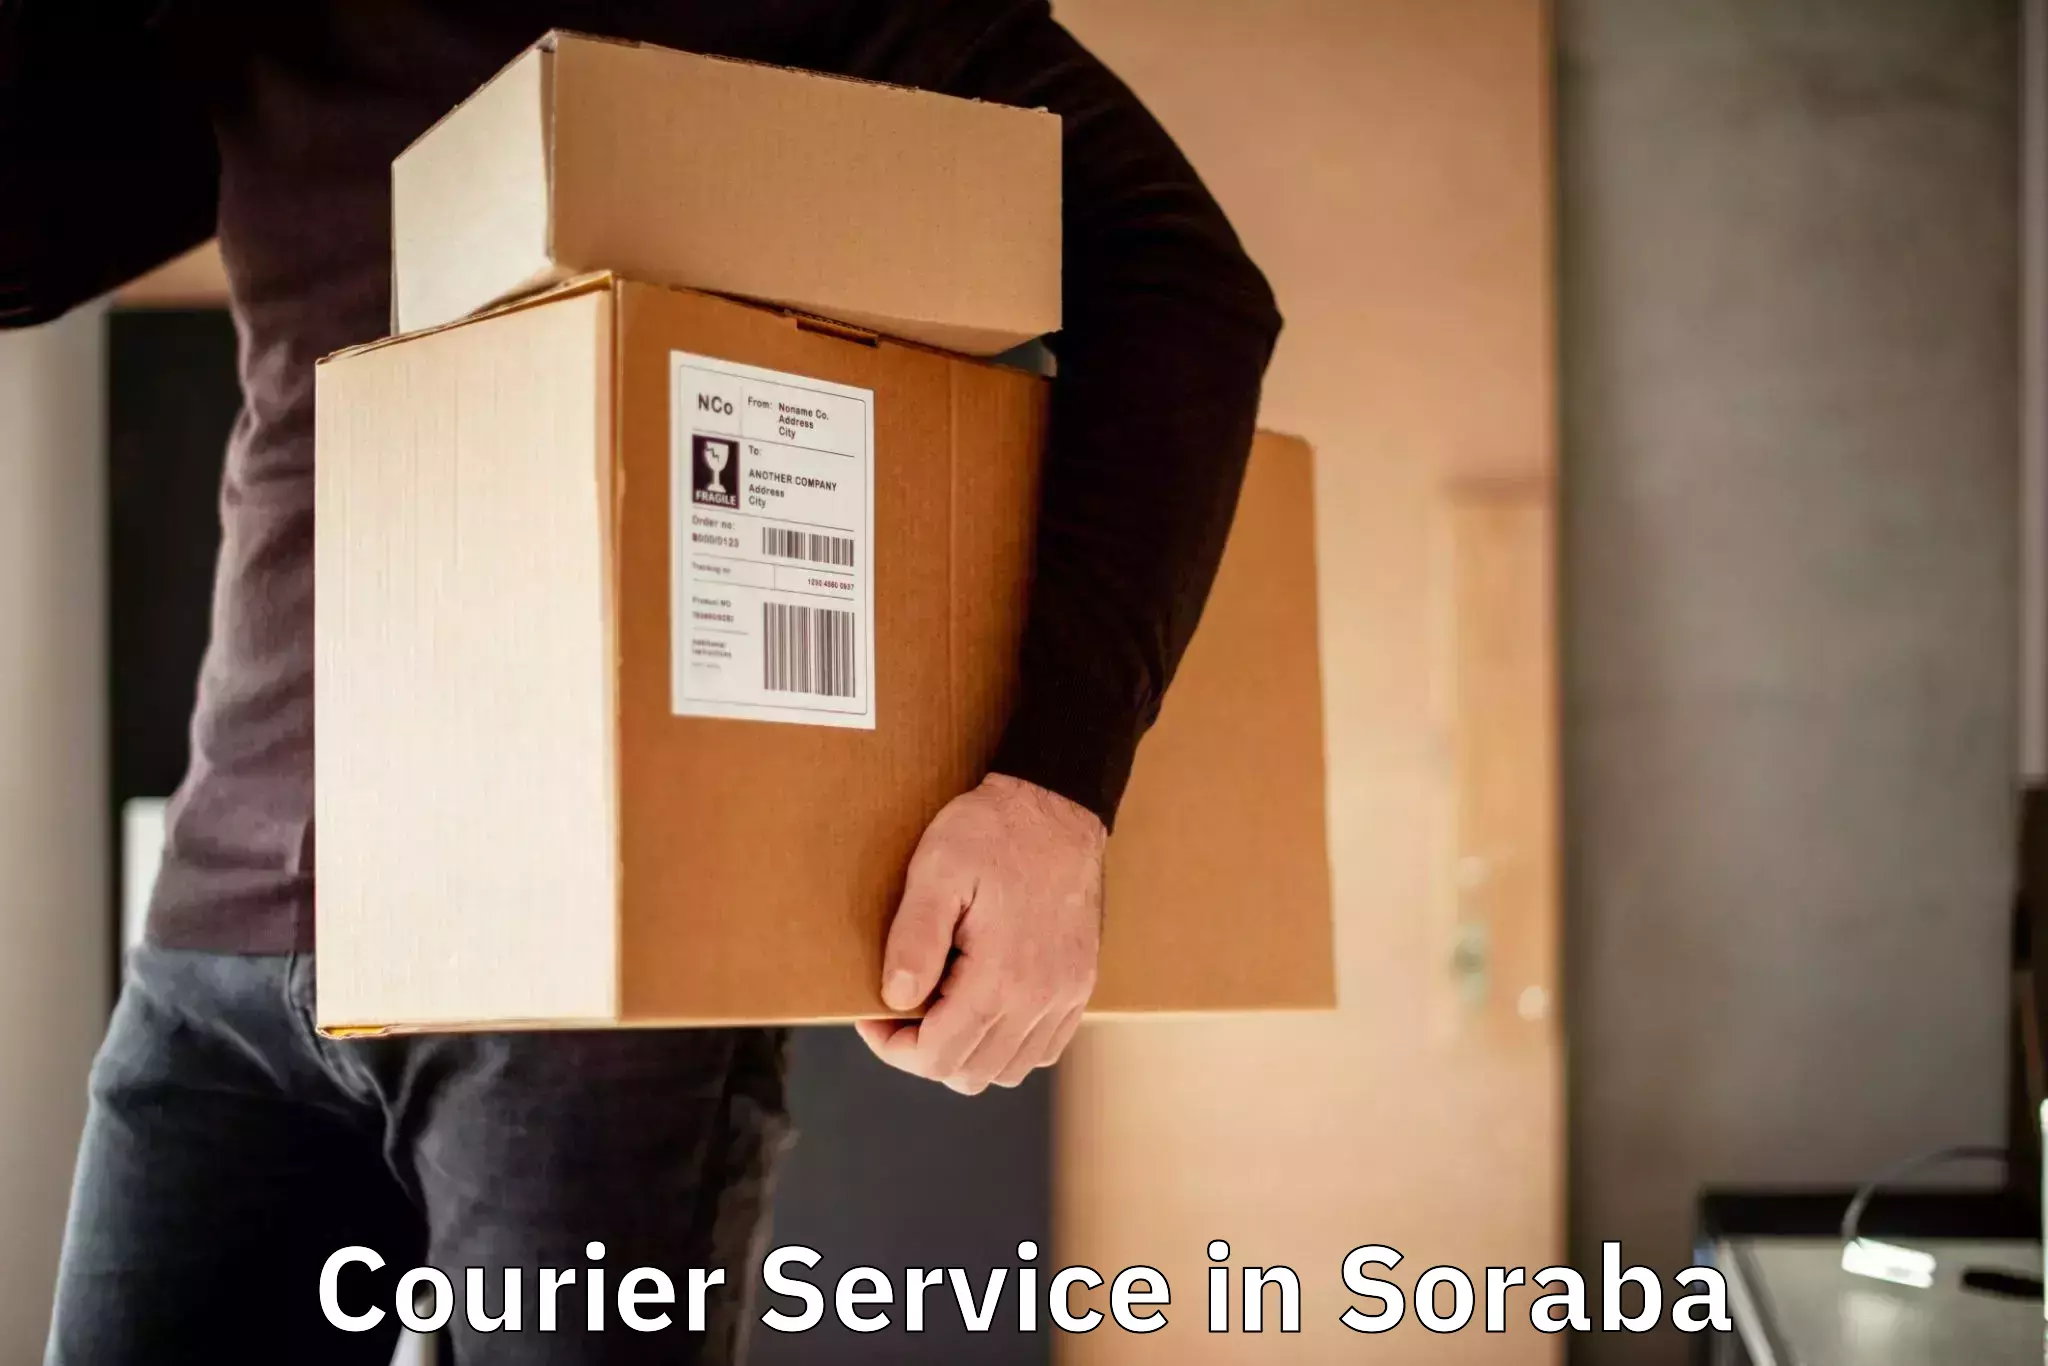 Overnight delivery services in Soraba